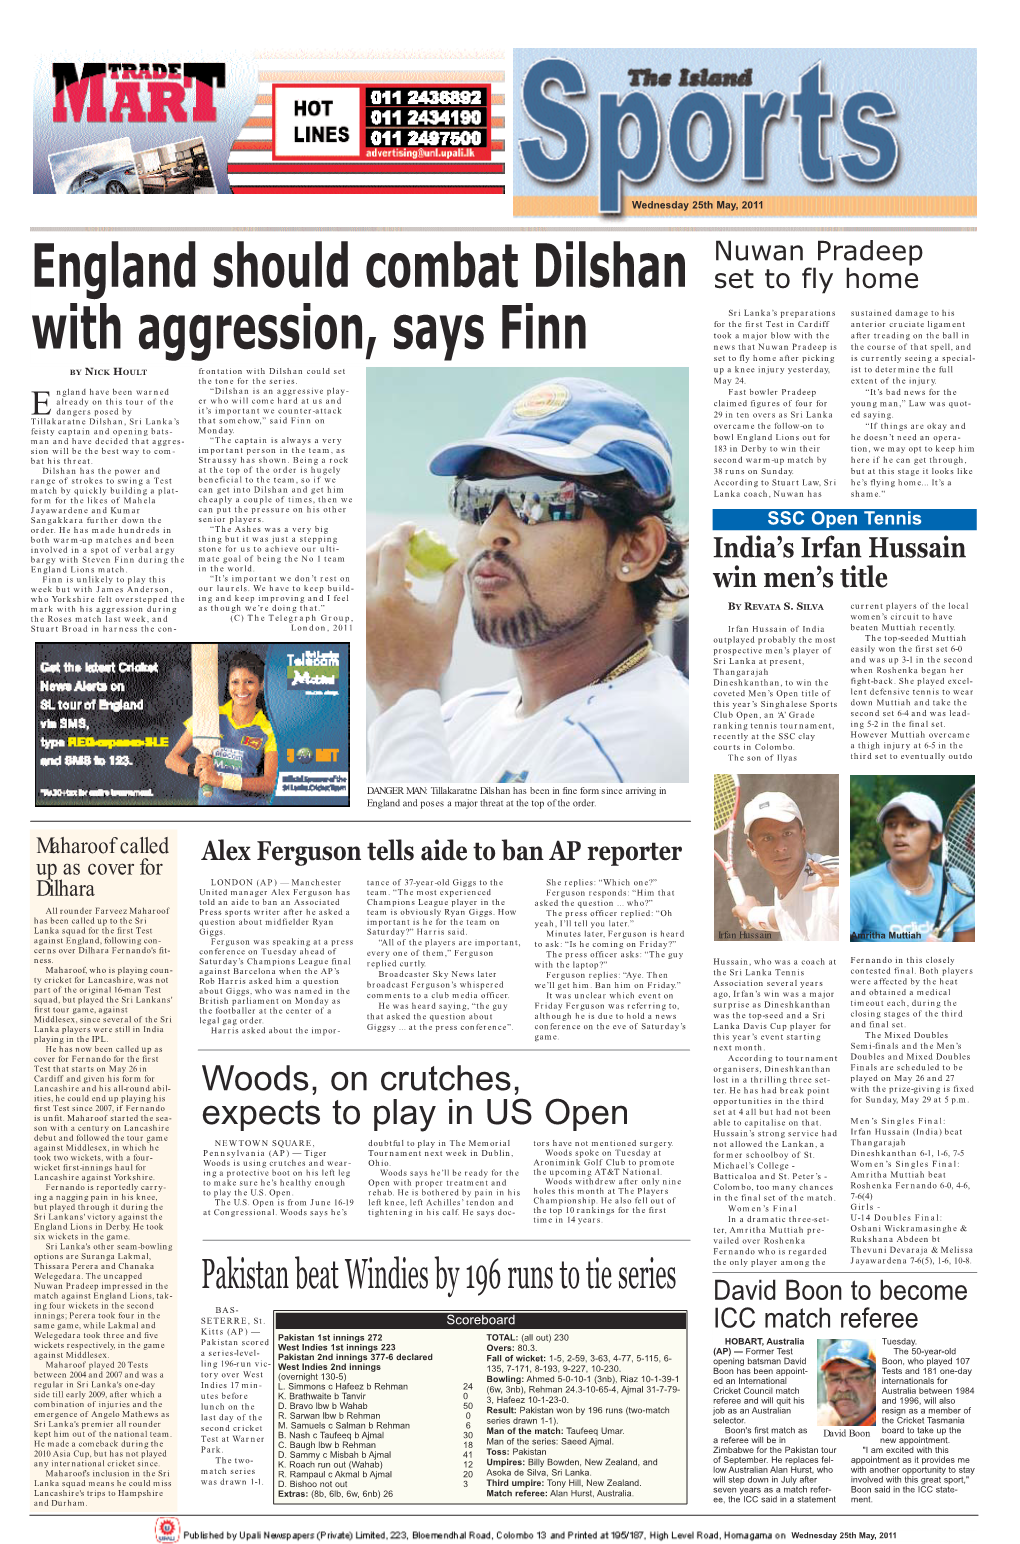 England Should Combat Dilshan with Aggression, Says Finn